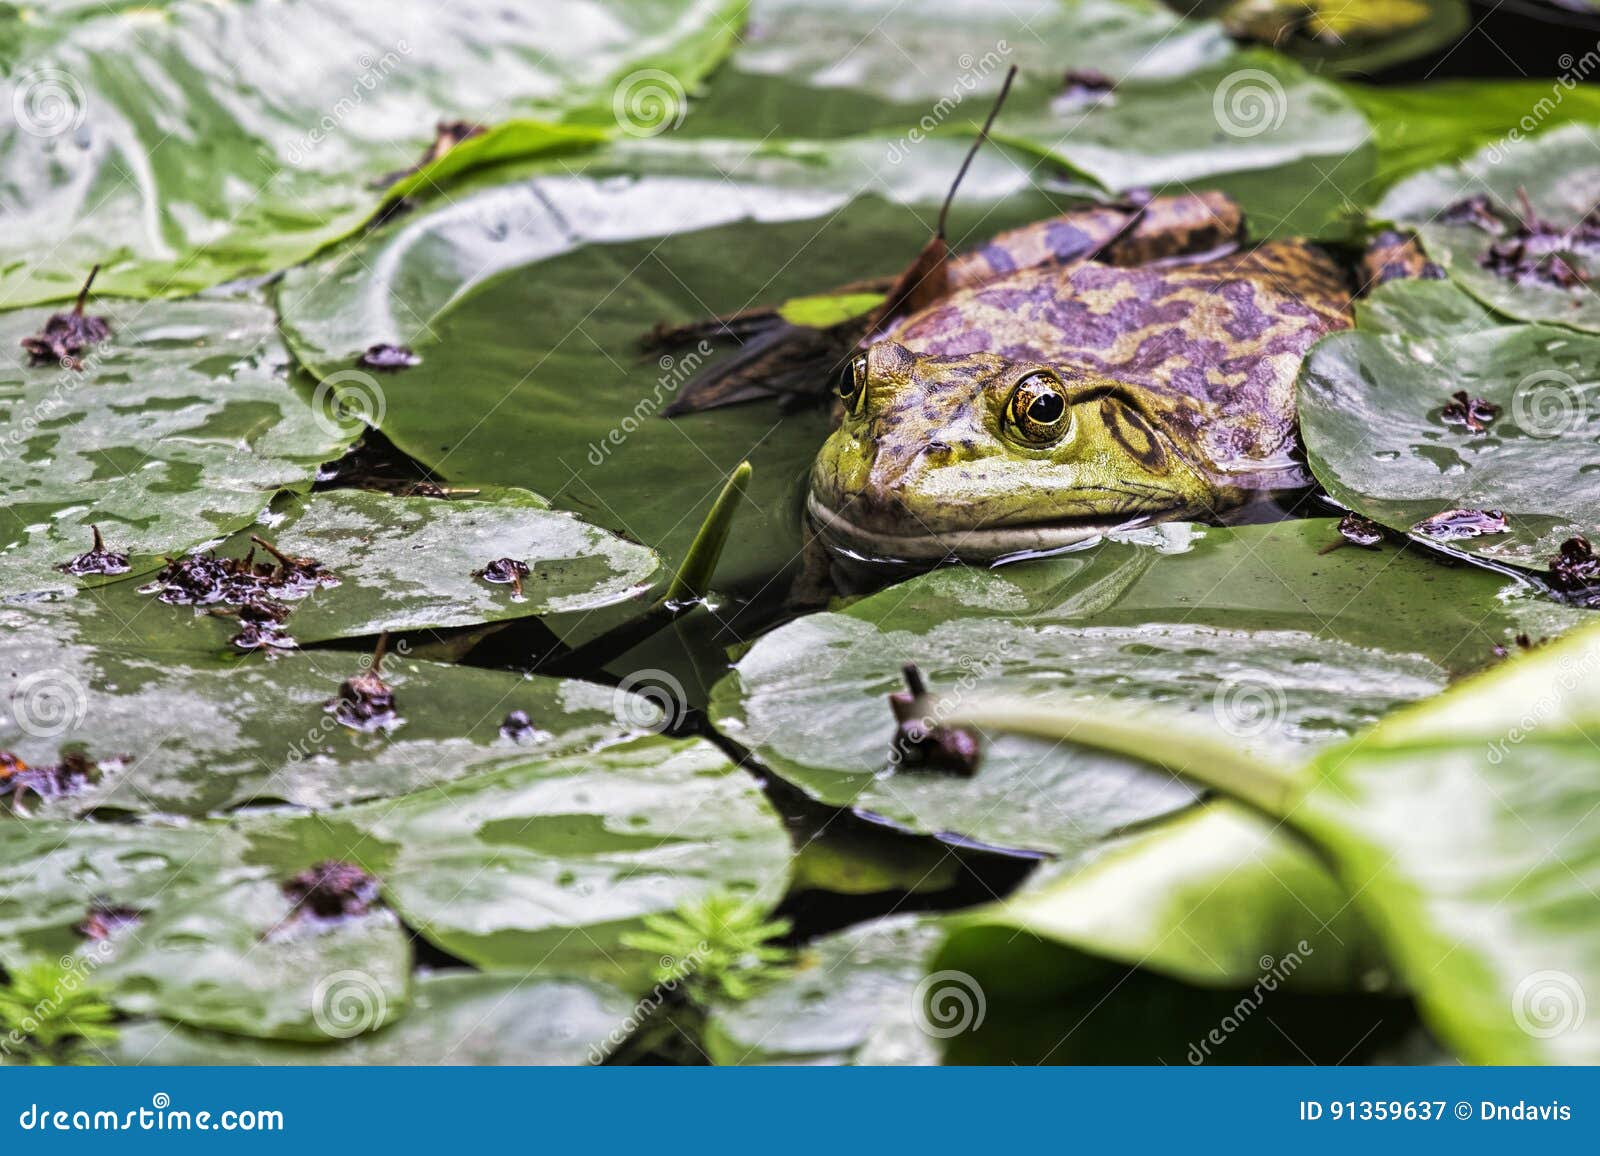 american bullfrog an invasive species of frog introduced to chin